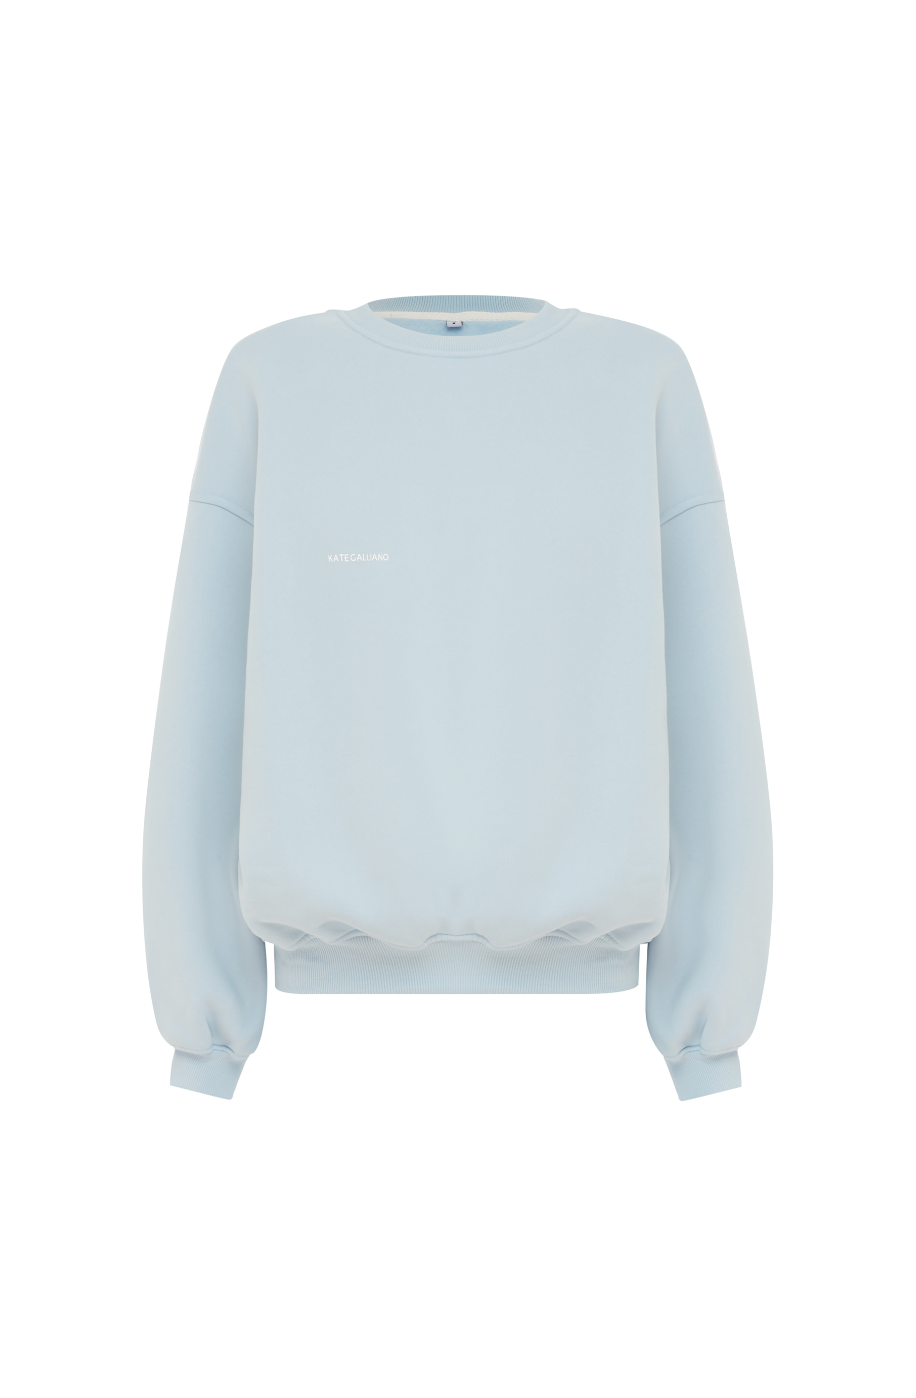 baby blue jumper -  Kate Galliano activewear  - jumper for women - sweater for women